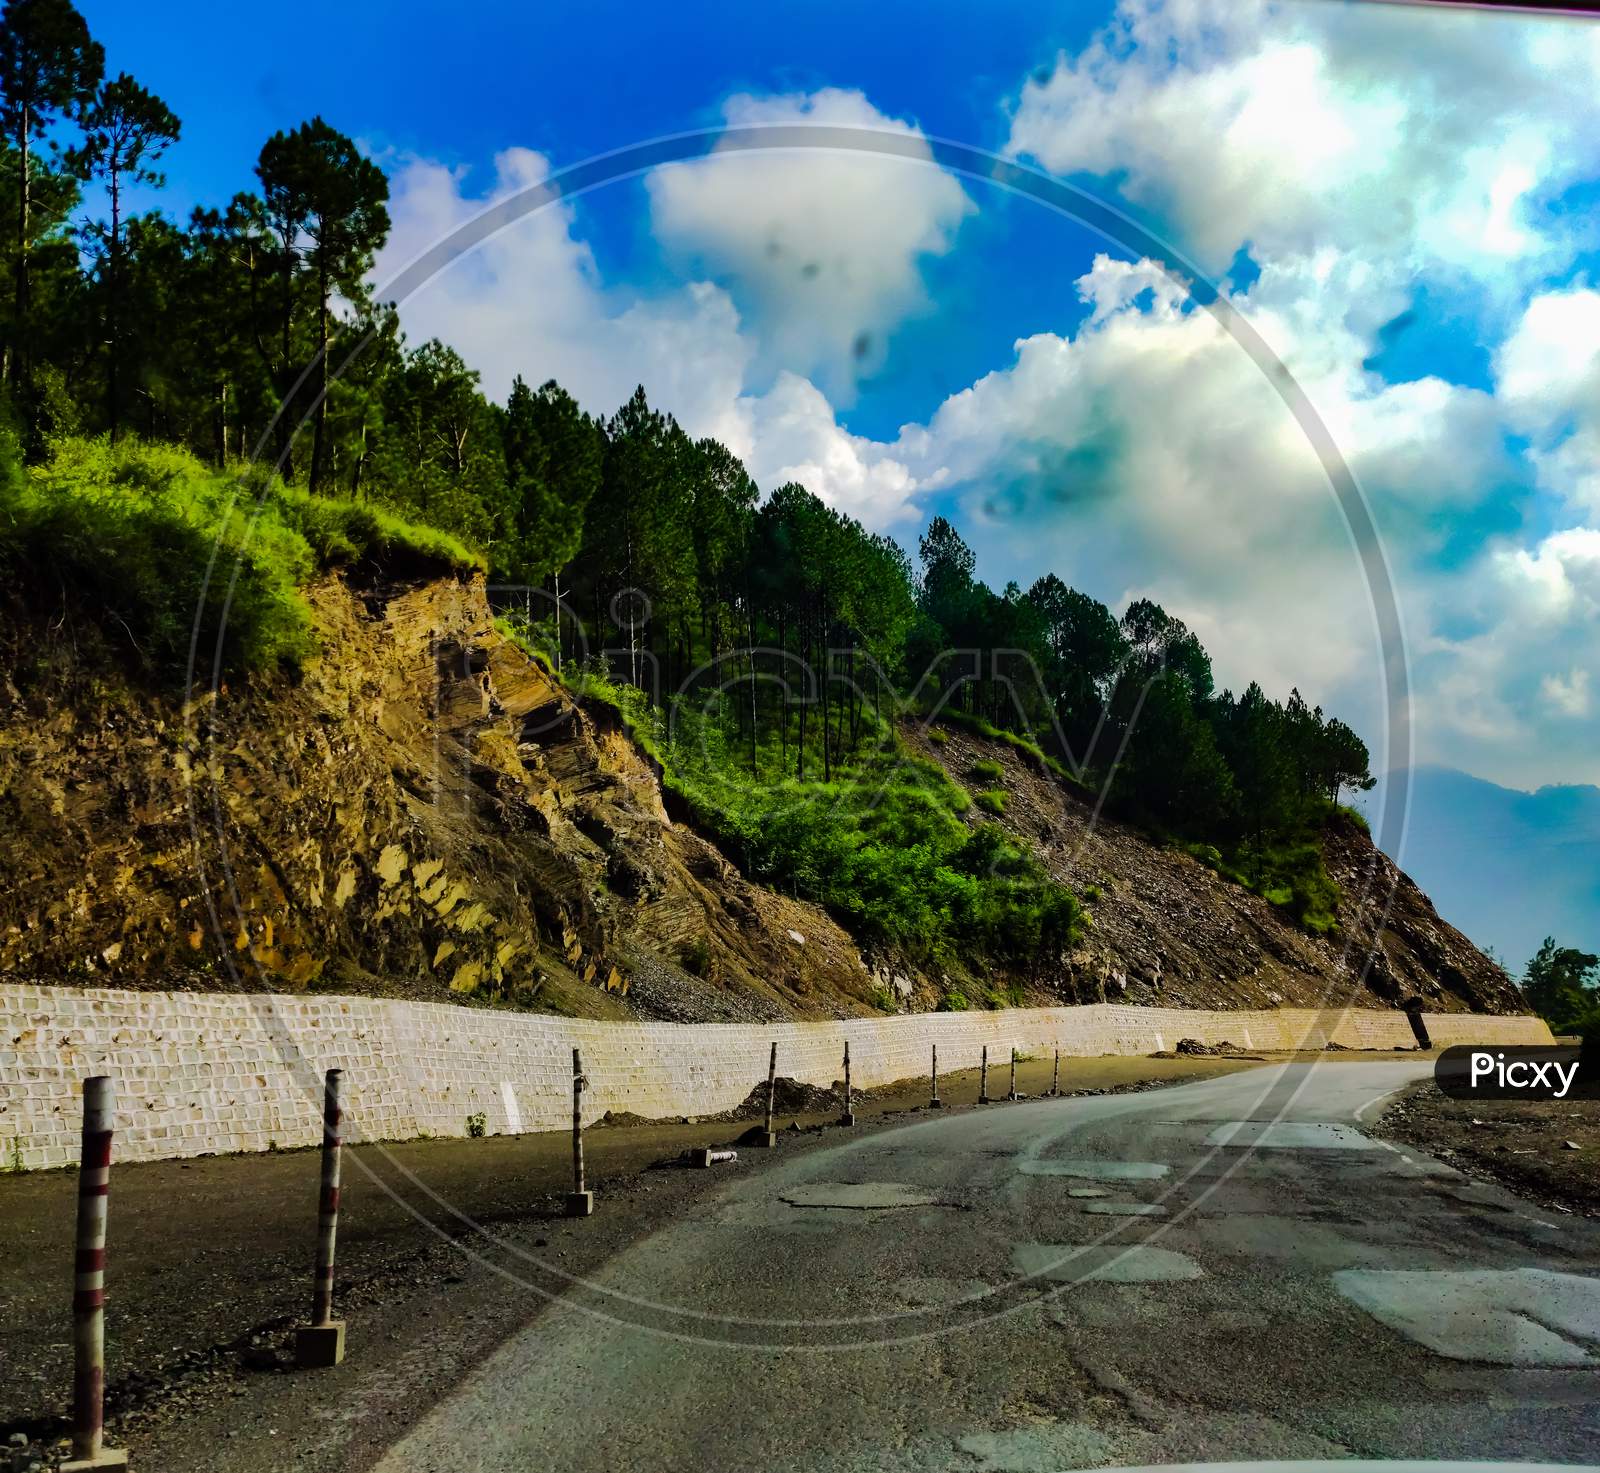 A view from the car while traveling from Shimla to Chandigarh amidst COVID 19 pandemic outbreak